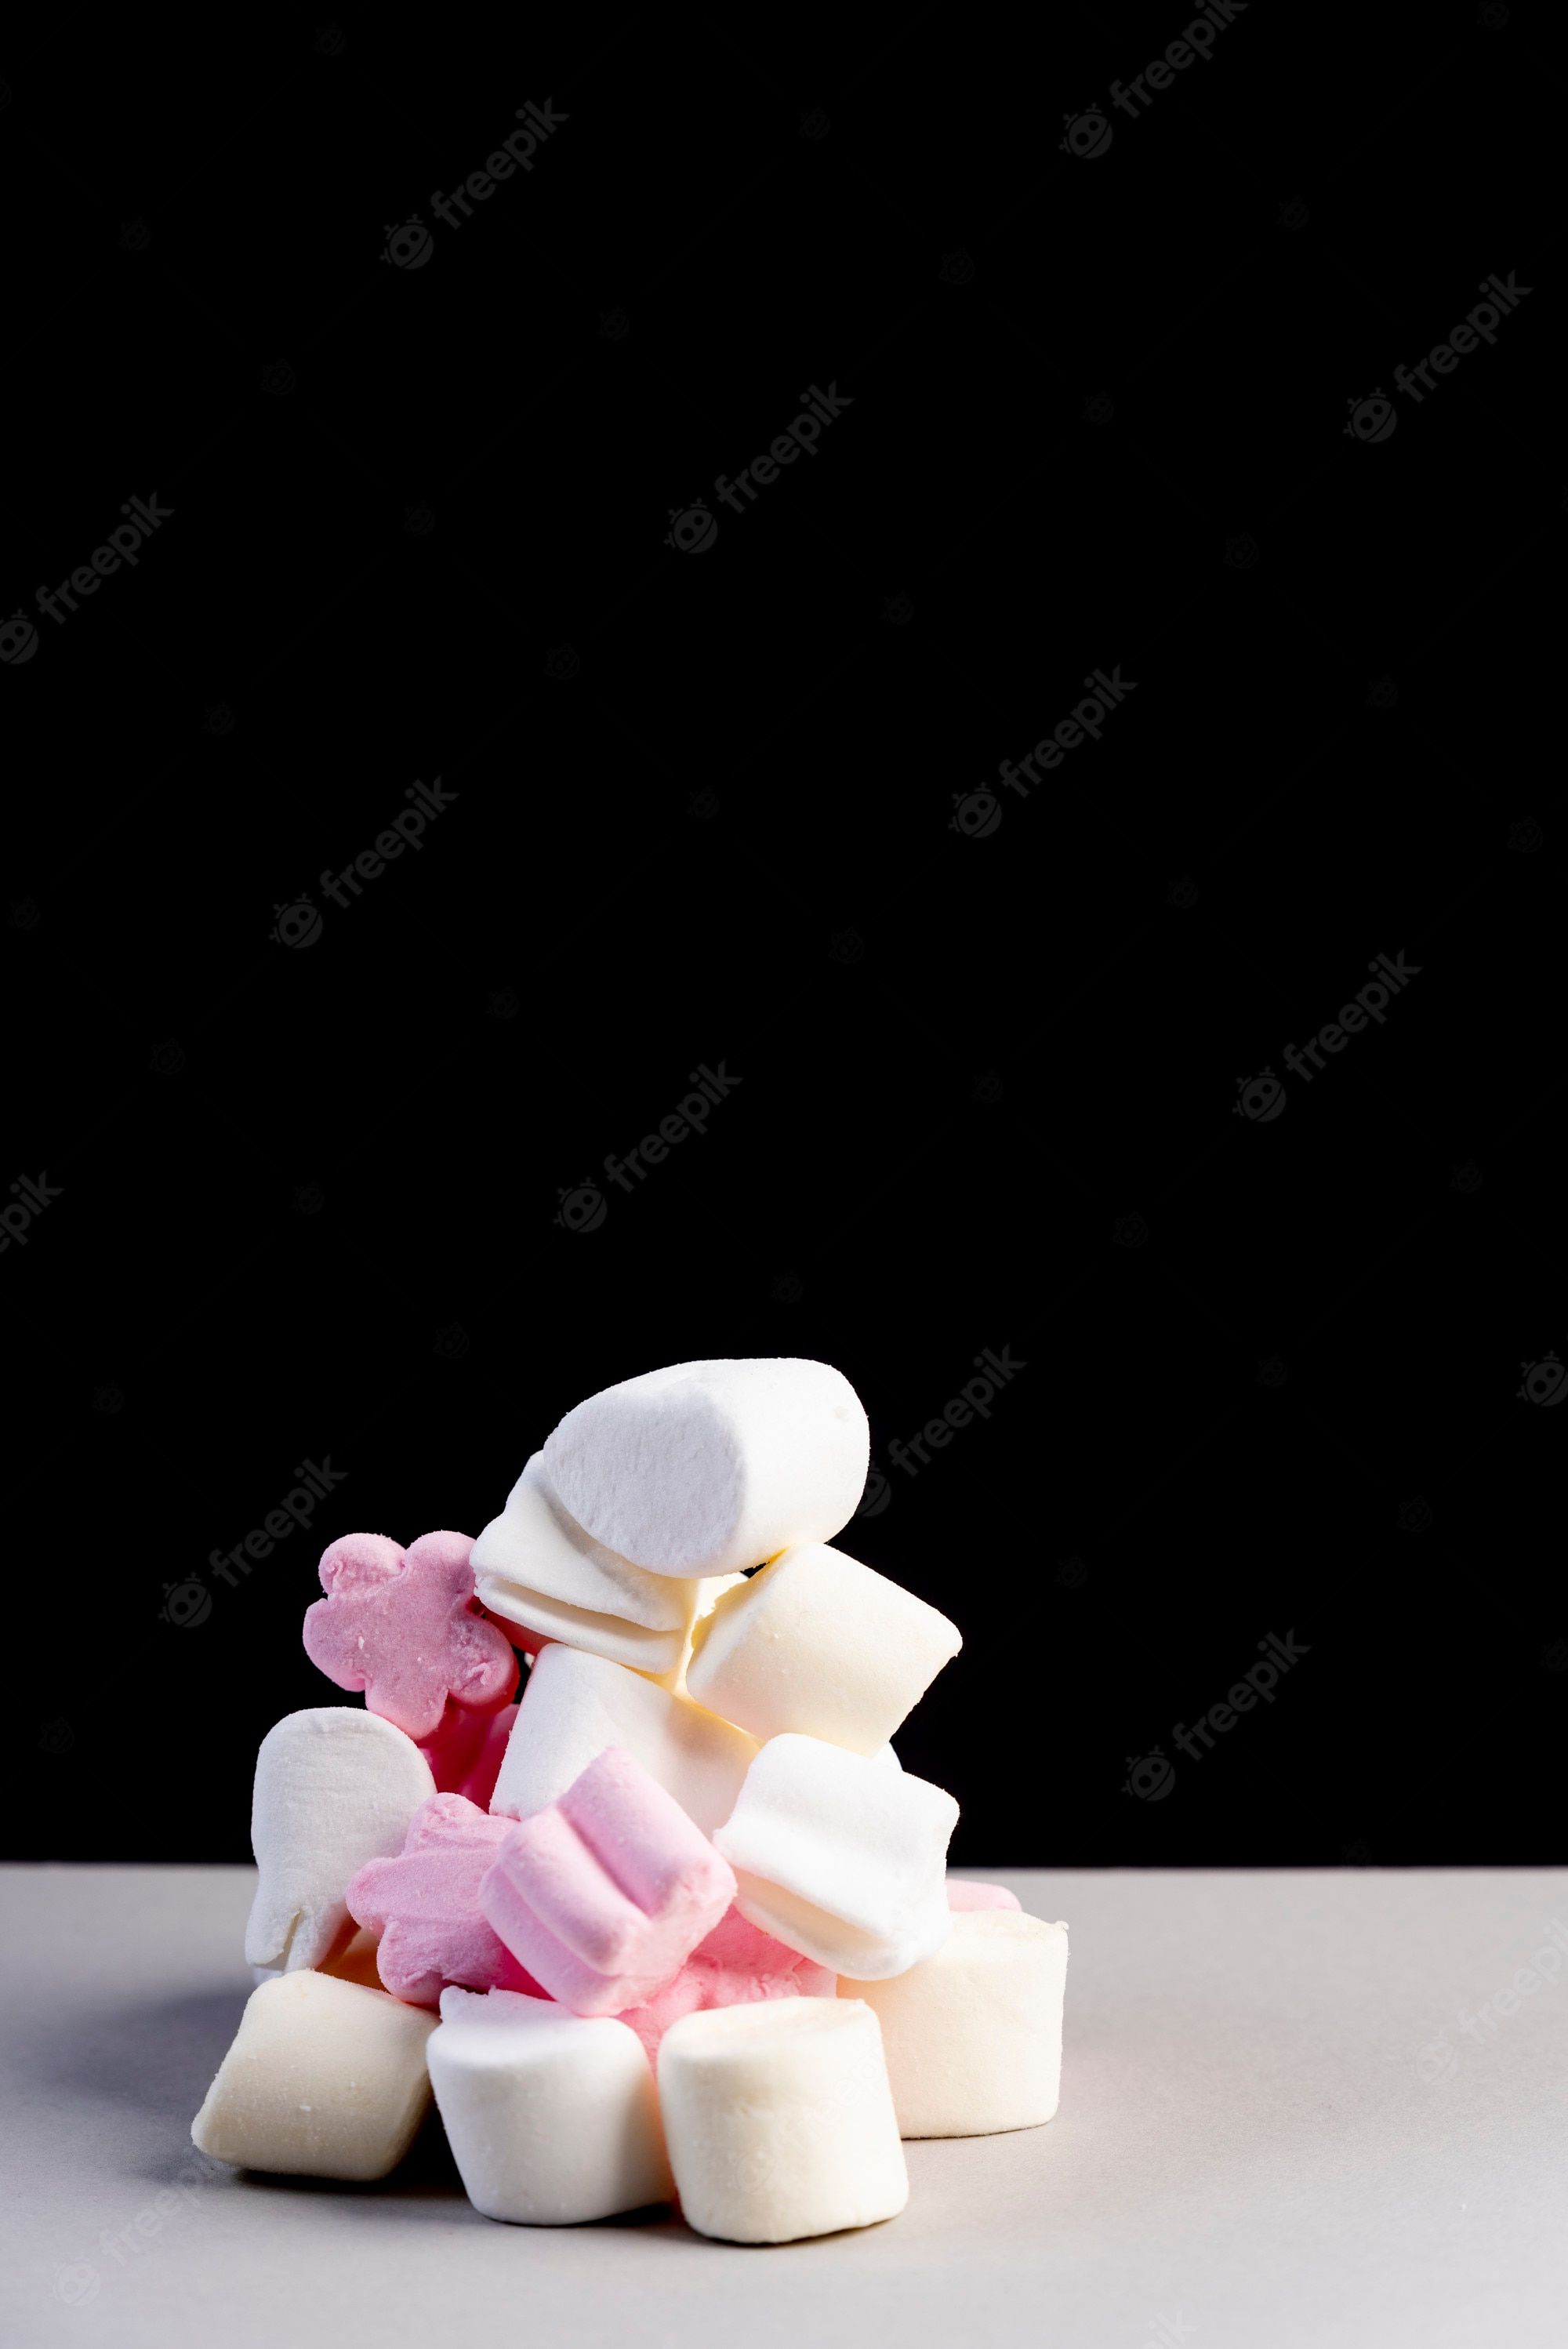 A tower of marshmallows on a black background - Marshmallows